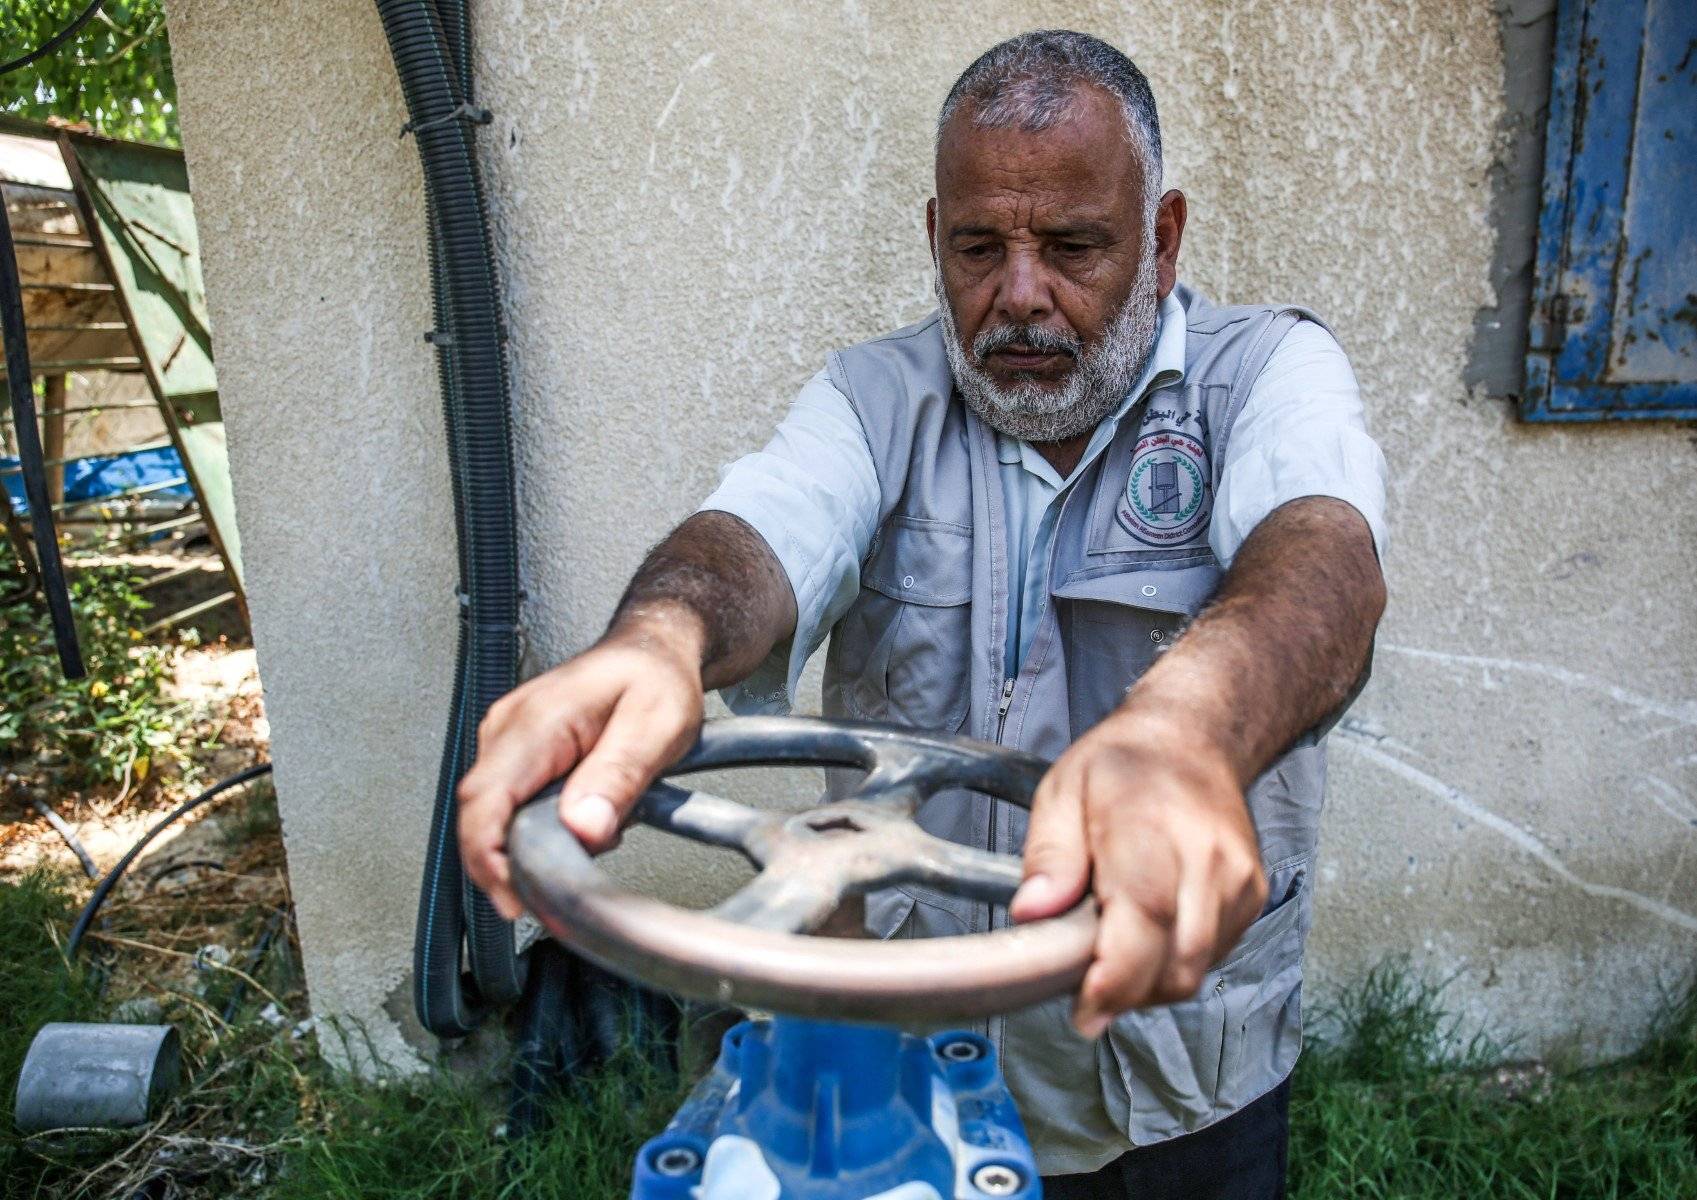 A Palestinian worker turns a valve at a water desalination plant in Khan Yunis in the southern Gaza strip on July 10, 2019. The population of Gaza facing a drinking water problem is increasing. Lacking natural resources, the Gaza Strip suffers from a chronic shortage of water, electricity and petrol. More than two-thirds of the population depends on humanitarian aid, which the United Nations says could become uninhabitable by 2020. (Photo by SAID KHATIB / AFP)